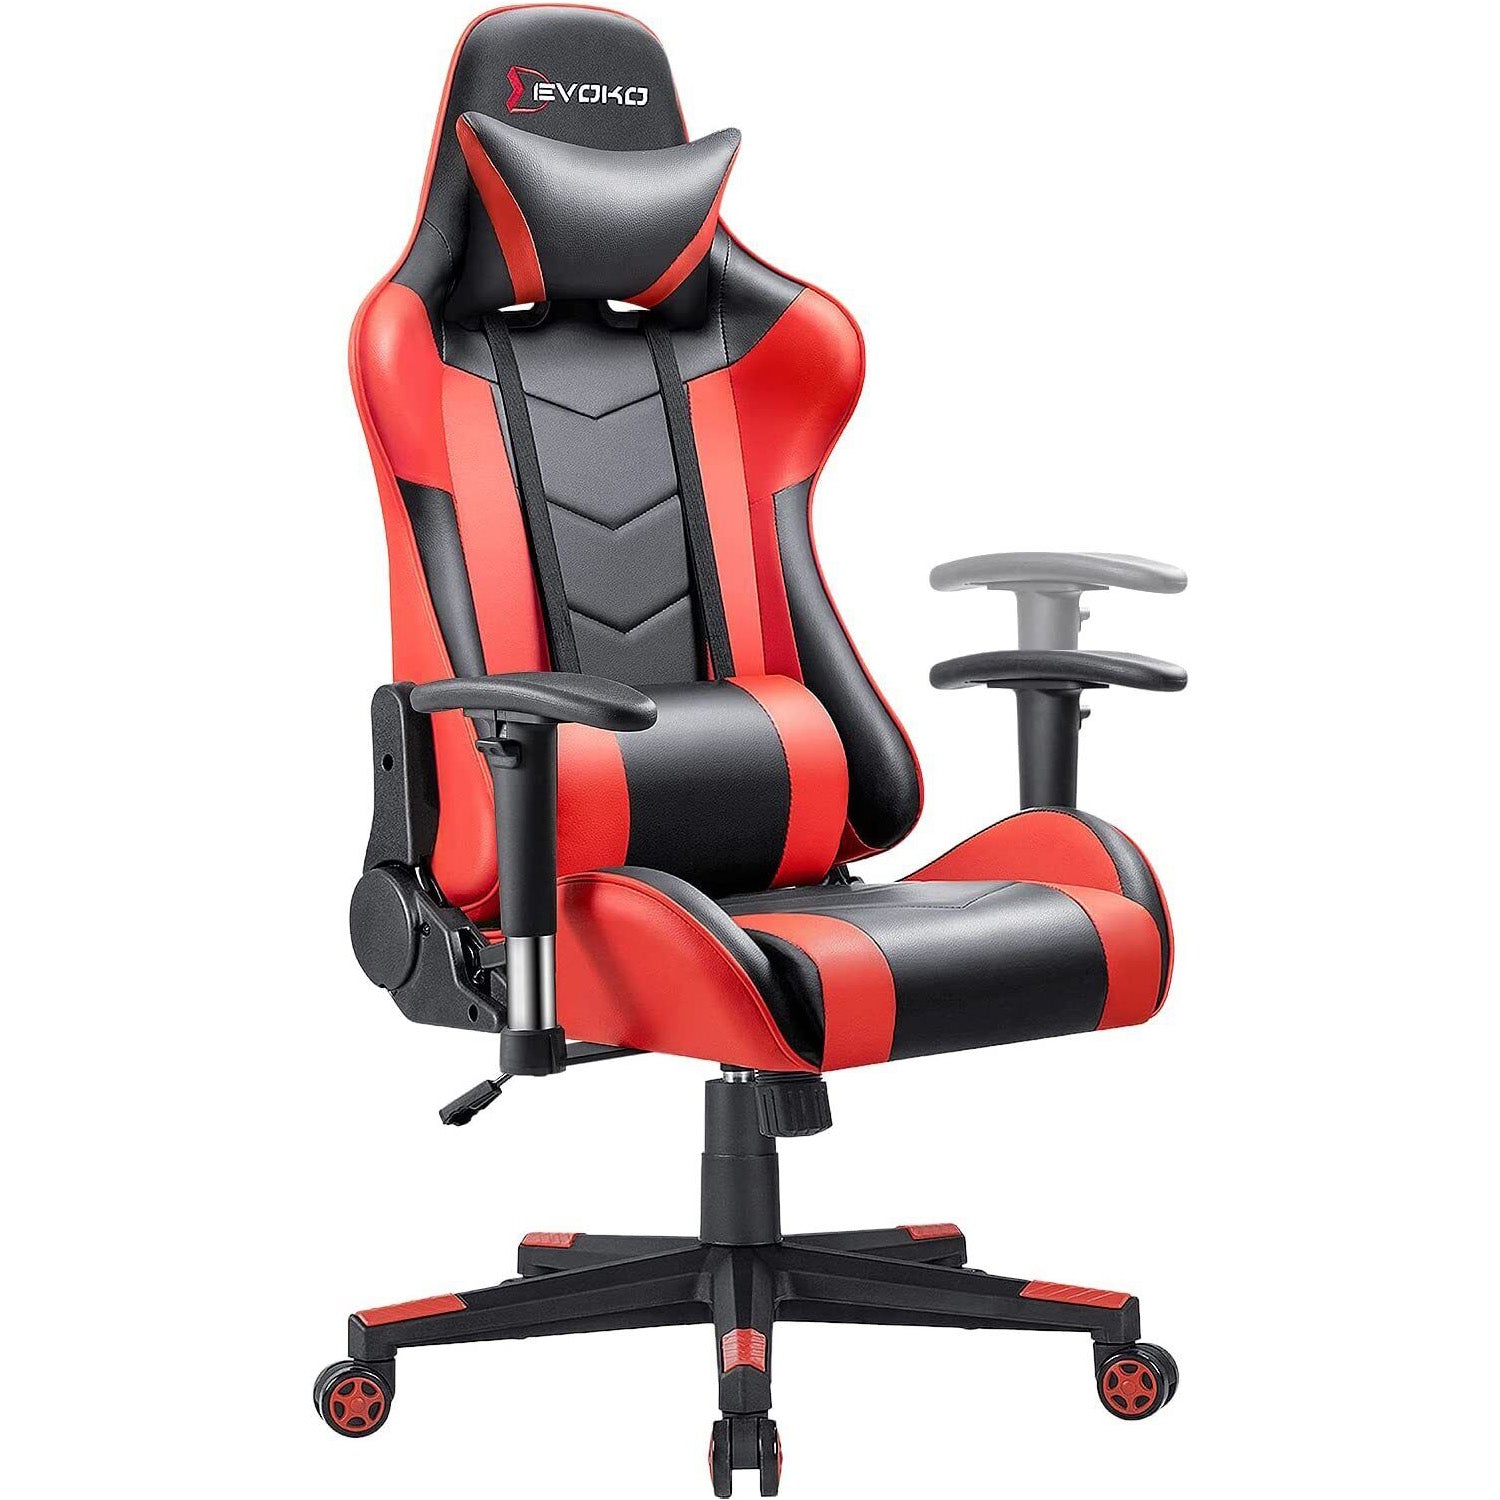 Furniwell Gaming Chair Racing Chair Desk Chair with Geadrest and Lumbar Support